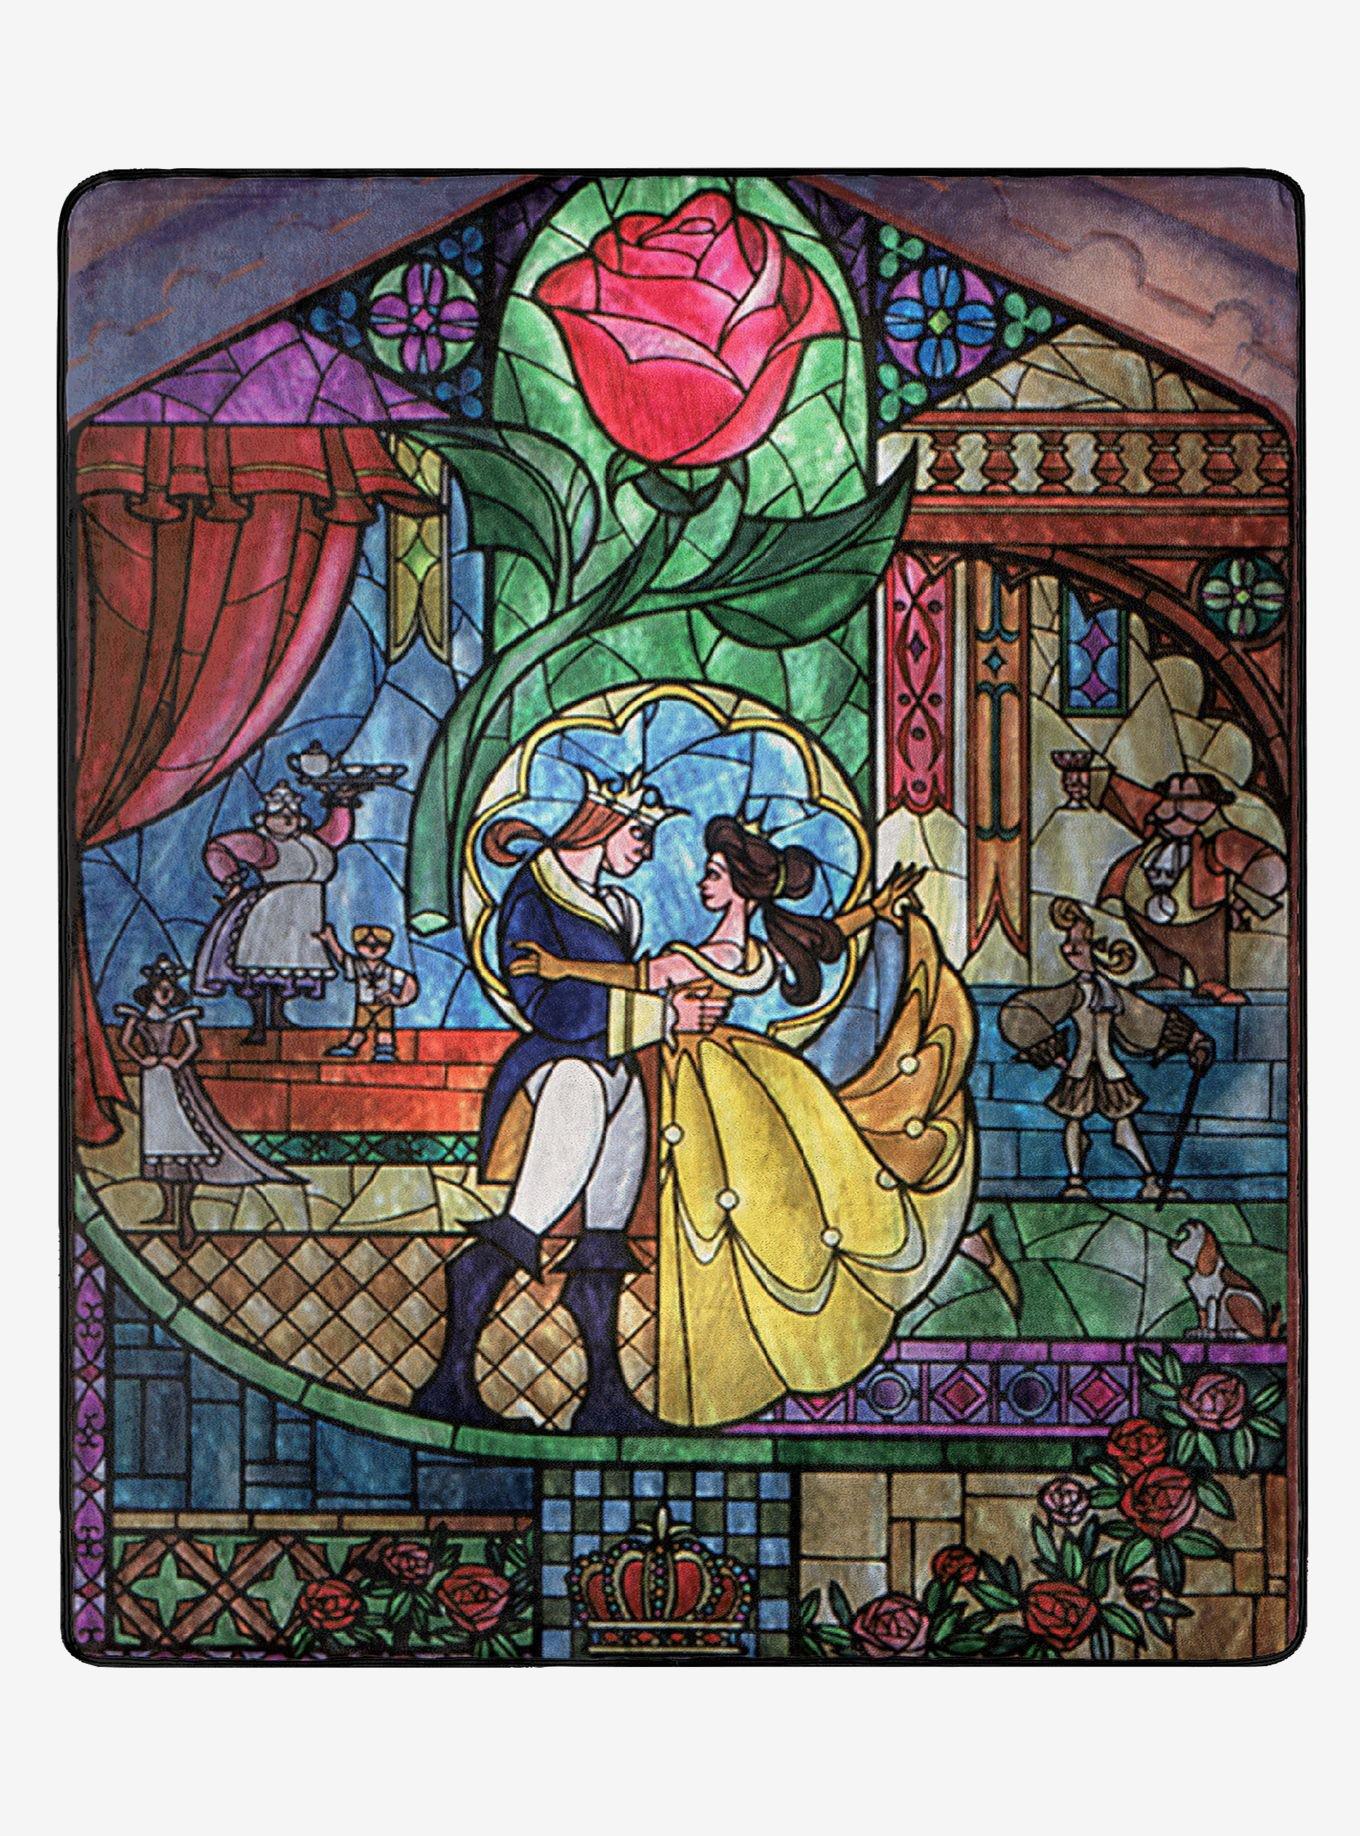 Loungefly Disney Beauty and The Beast Stained Glass Castle Mini